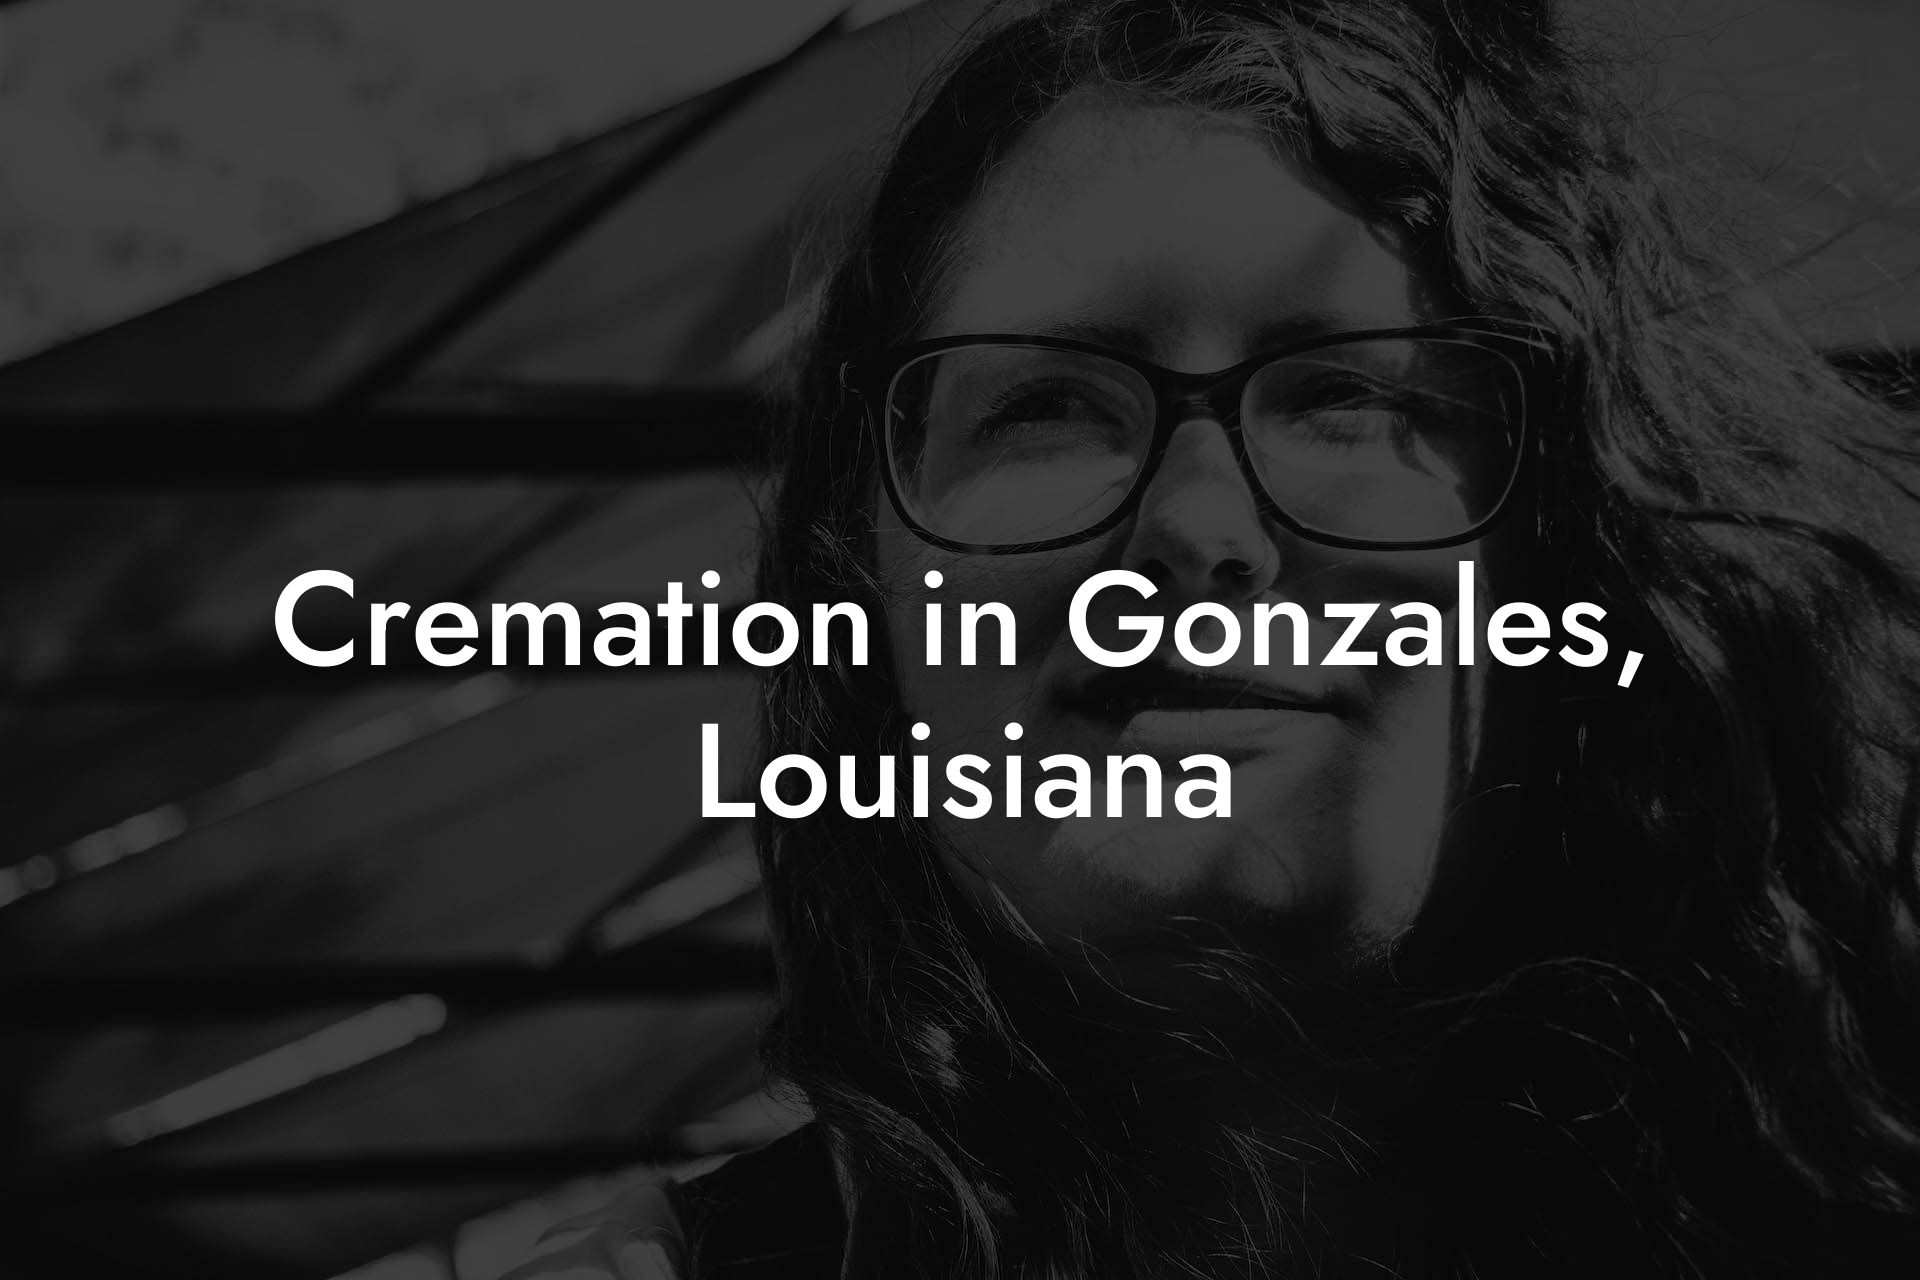 Cremation in Gonzales, Louisiana